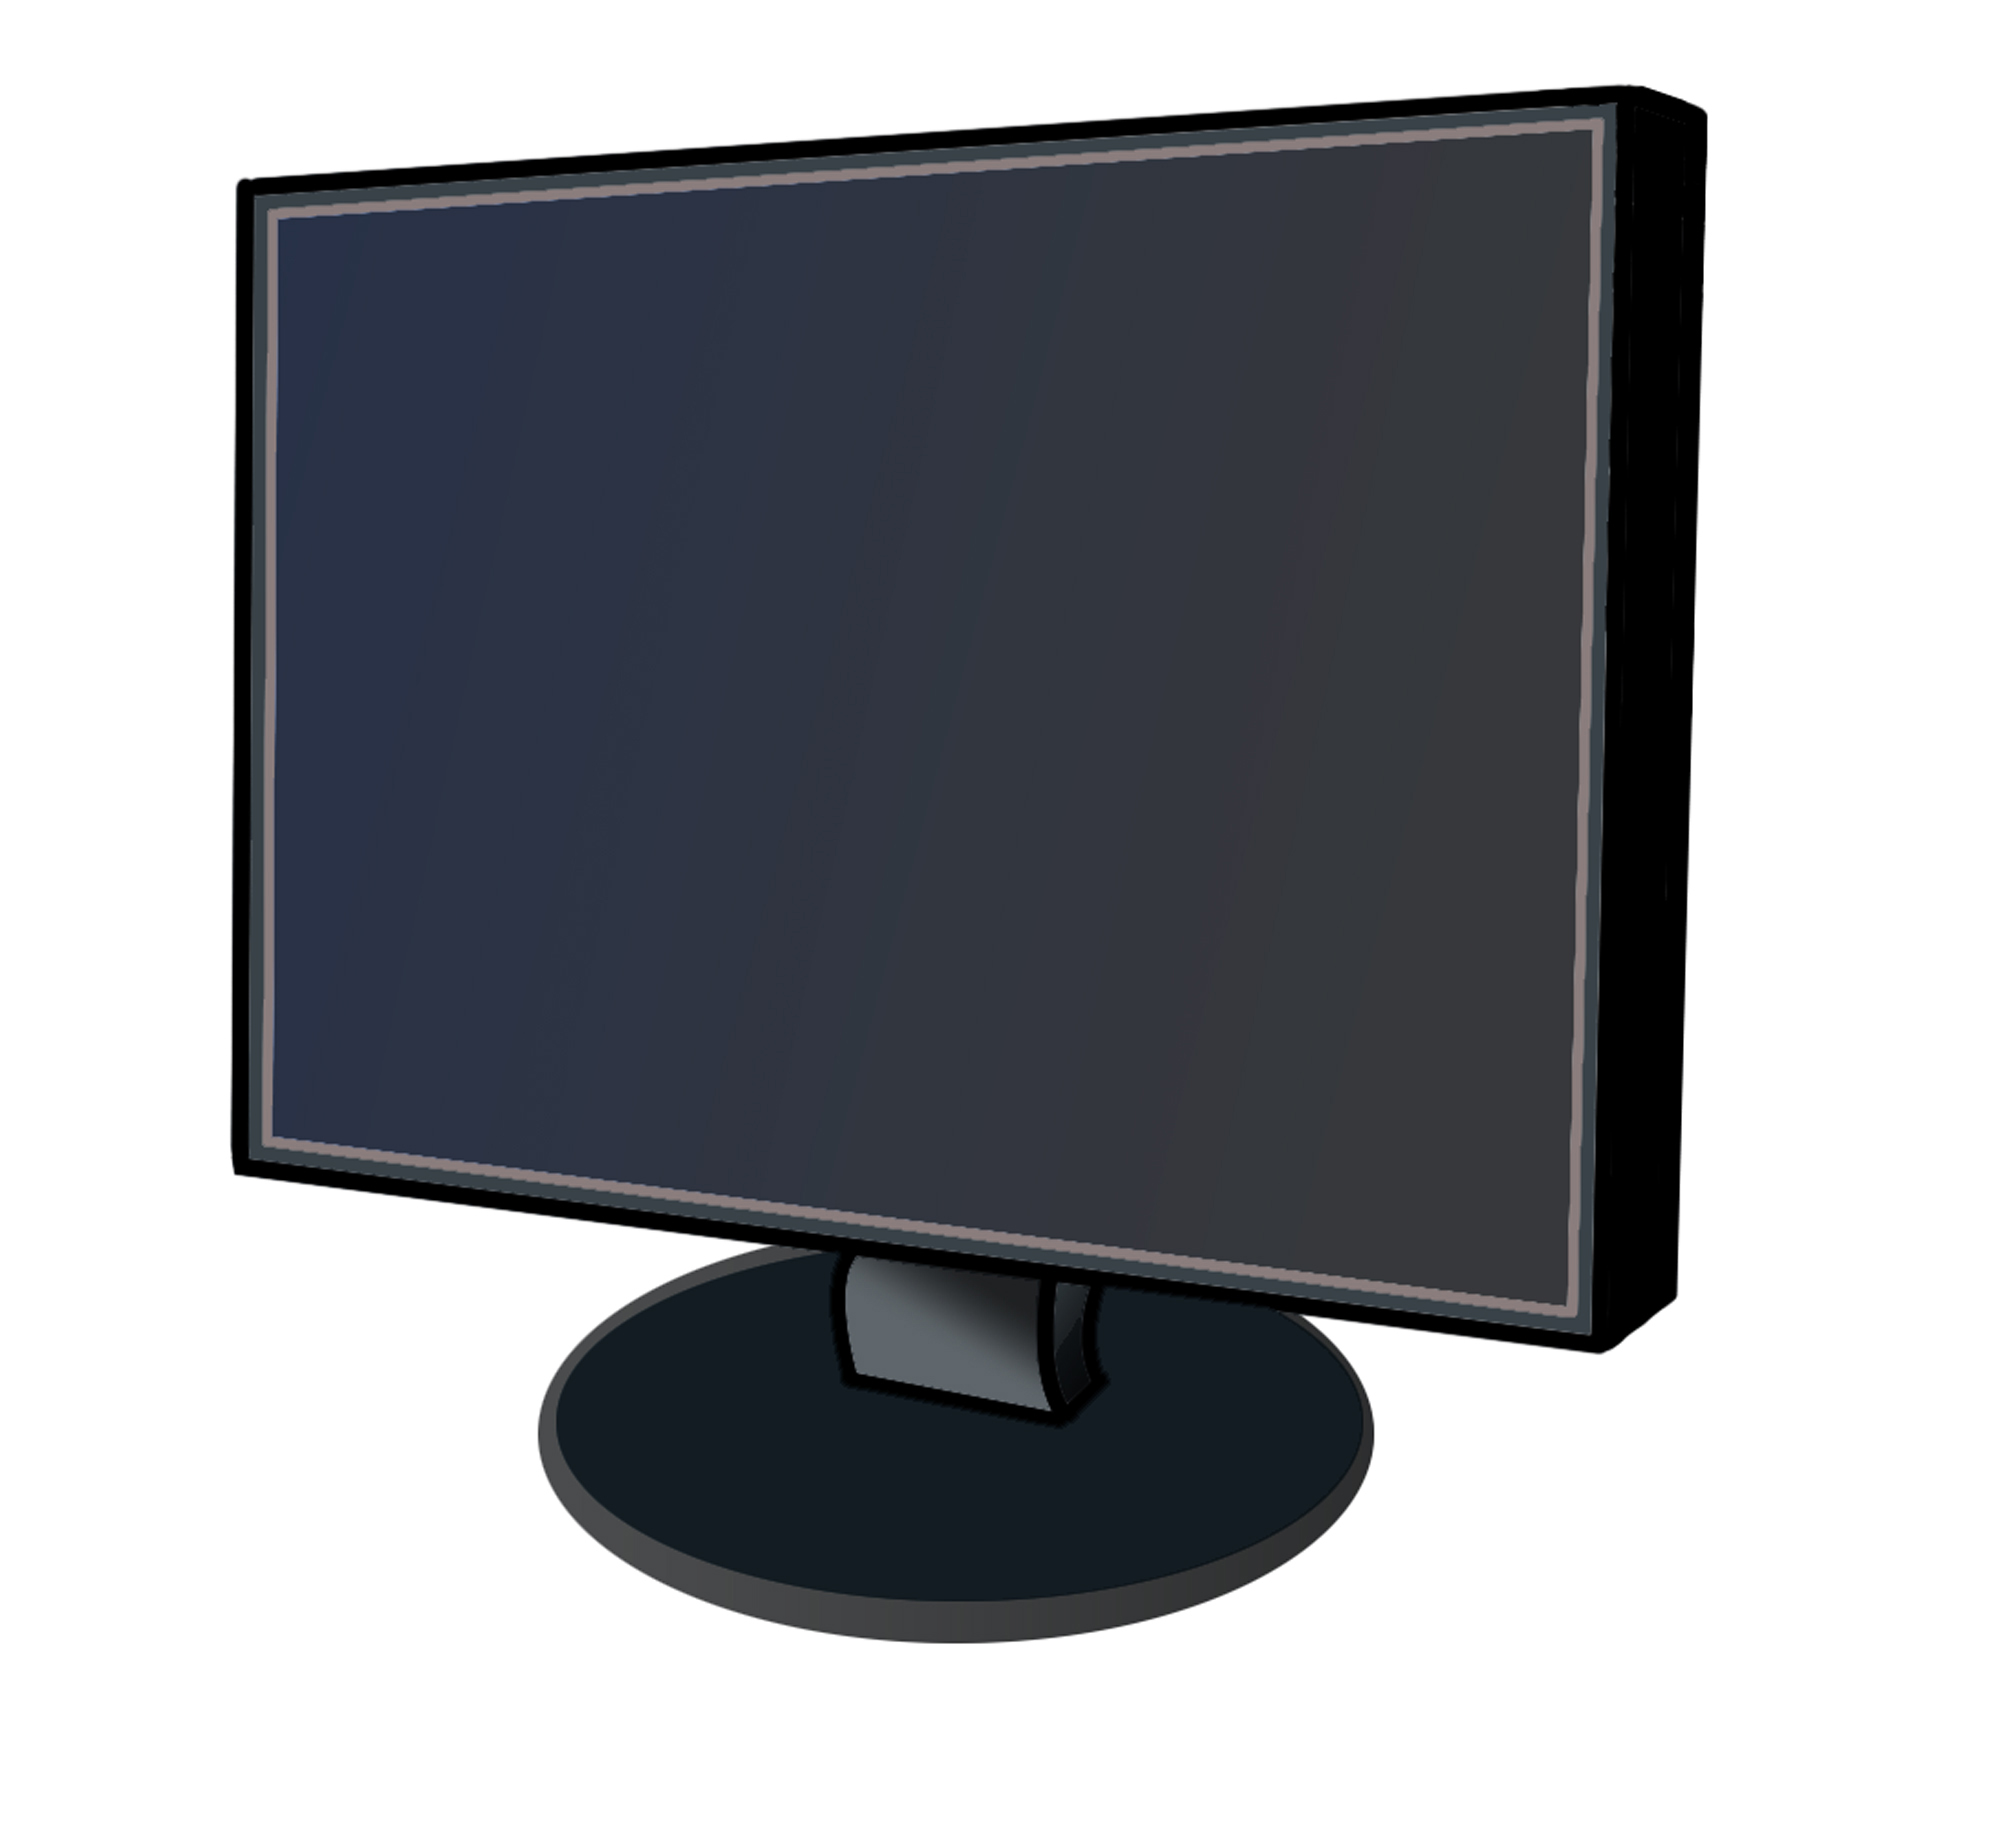 Free Computer Screen Clipart, Download Free Clip Art, Free.